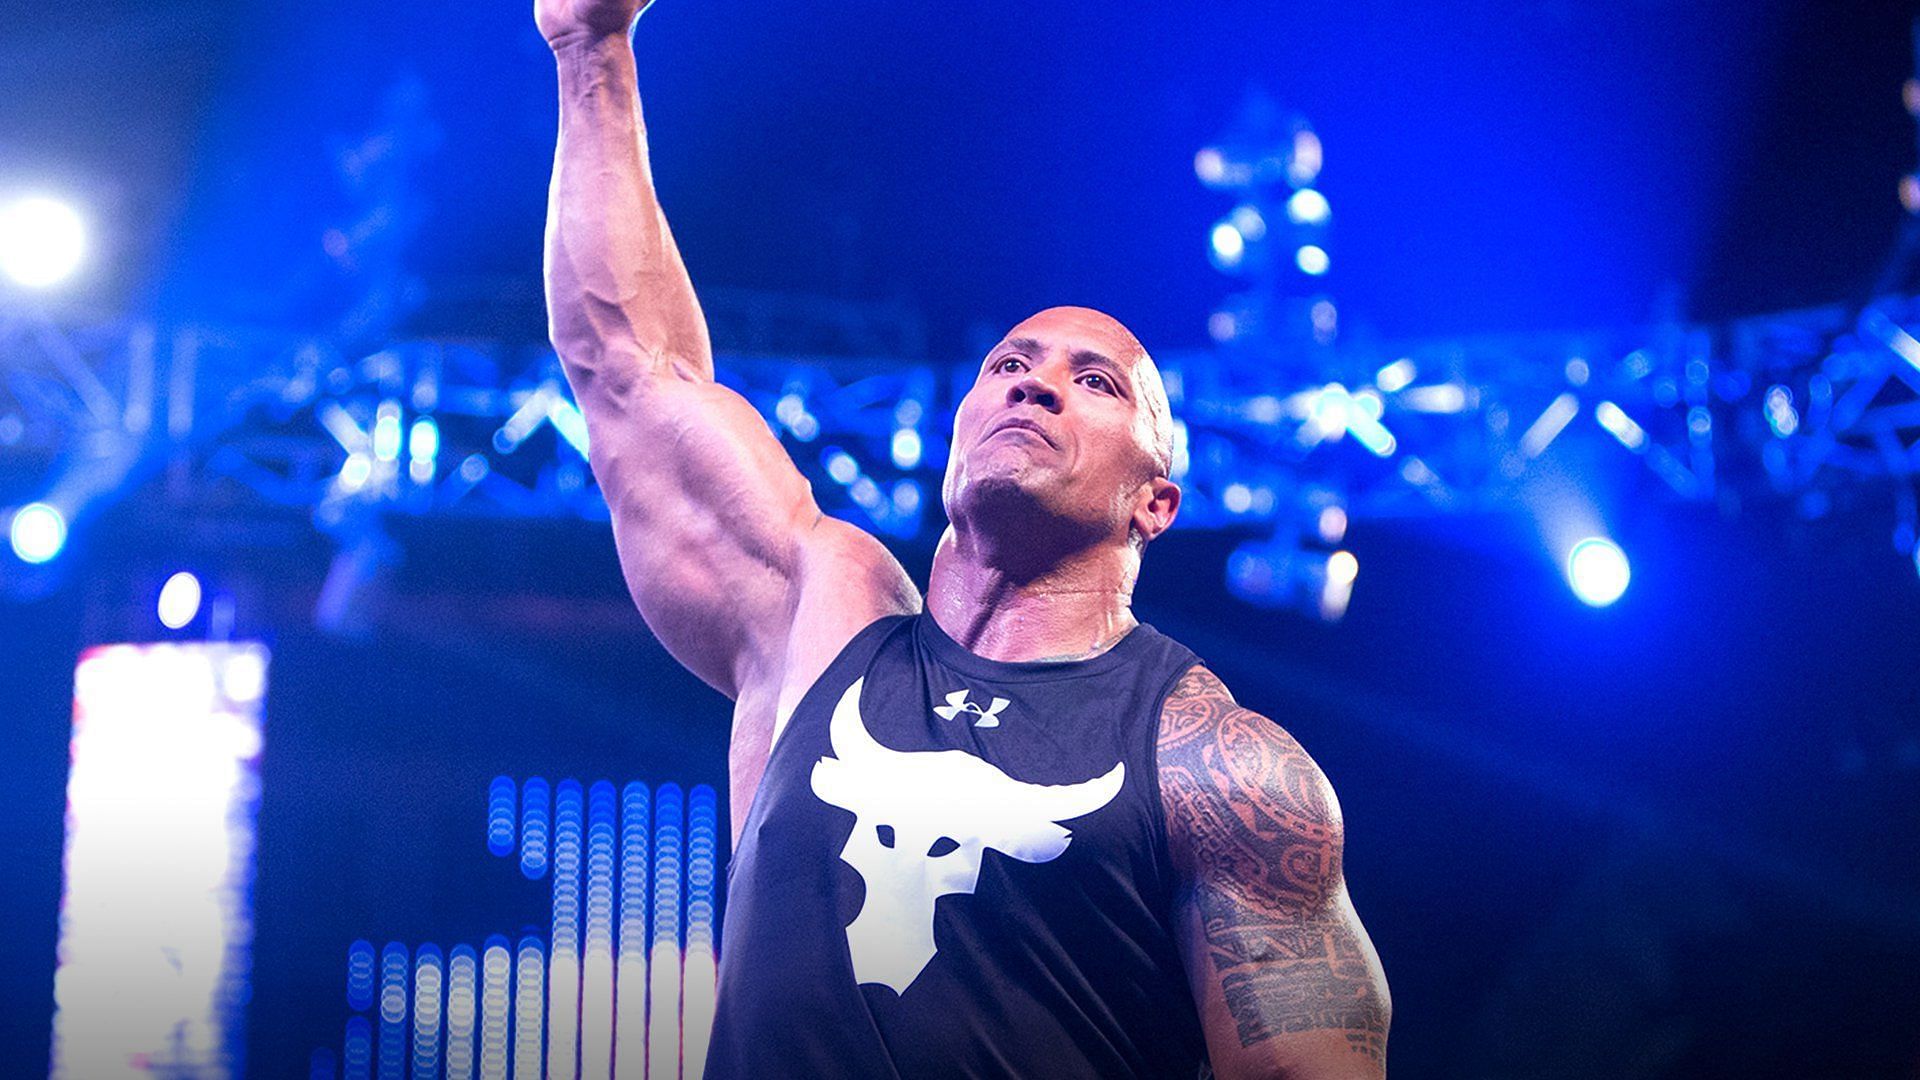 The Rock was announced as the host of WrestleMania XXVII.